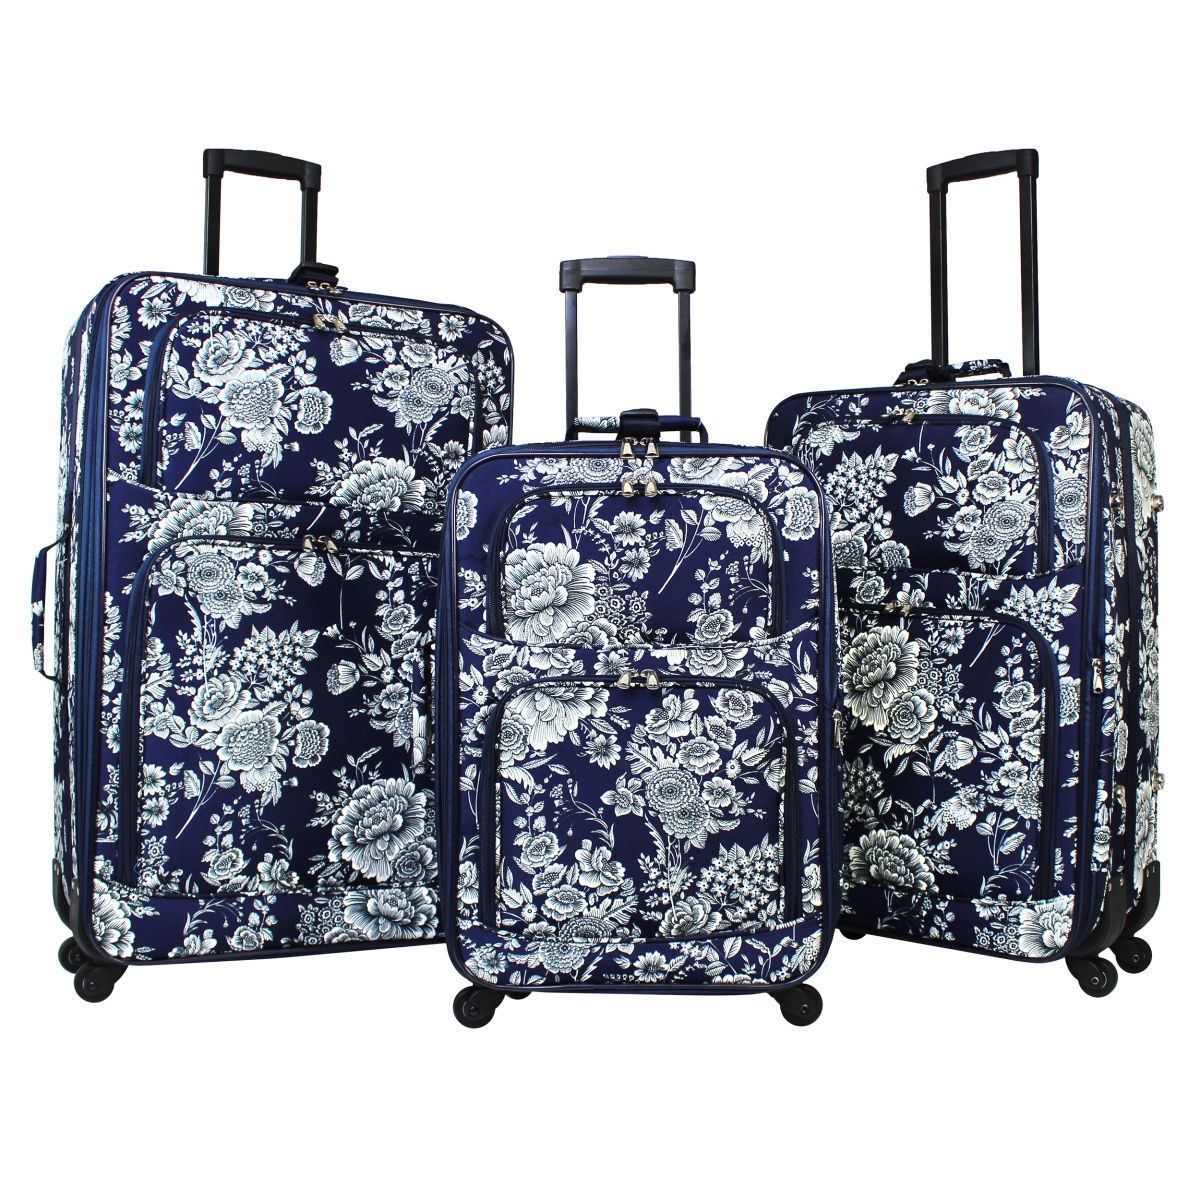 818703-212 3 Piece Expandable Spinner Luggage Set - Navy White Flowers